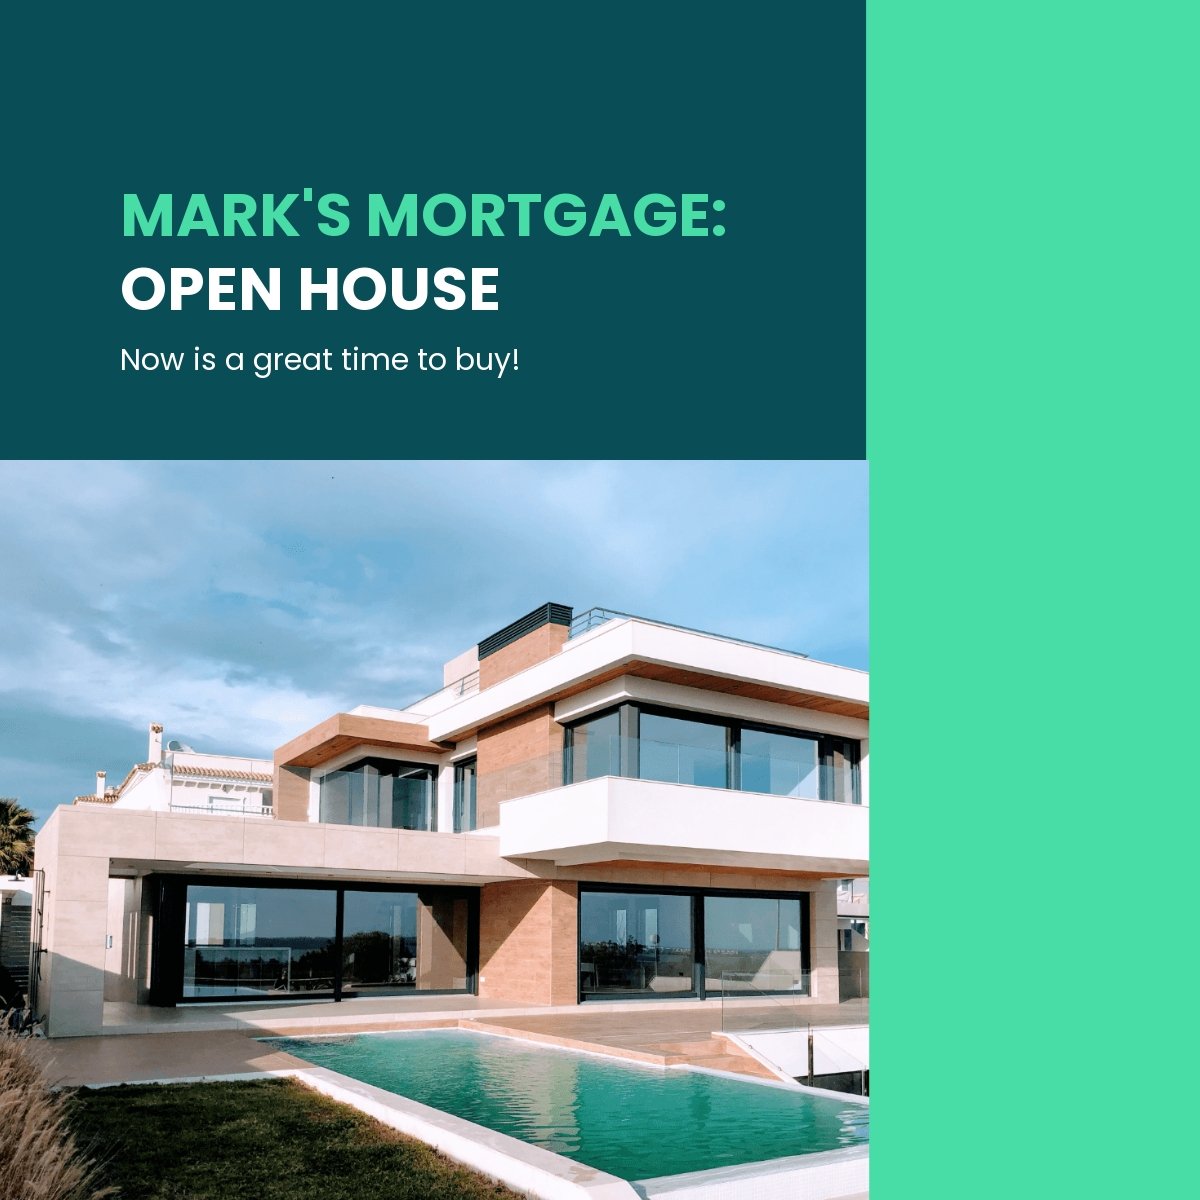 Free Mortgage Open House Linkedin Post Template